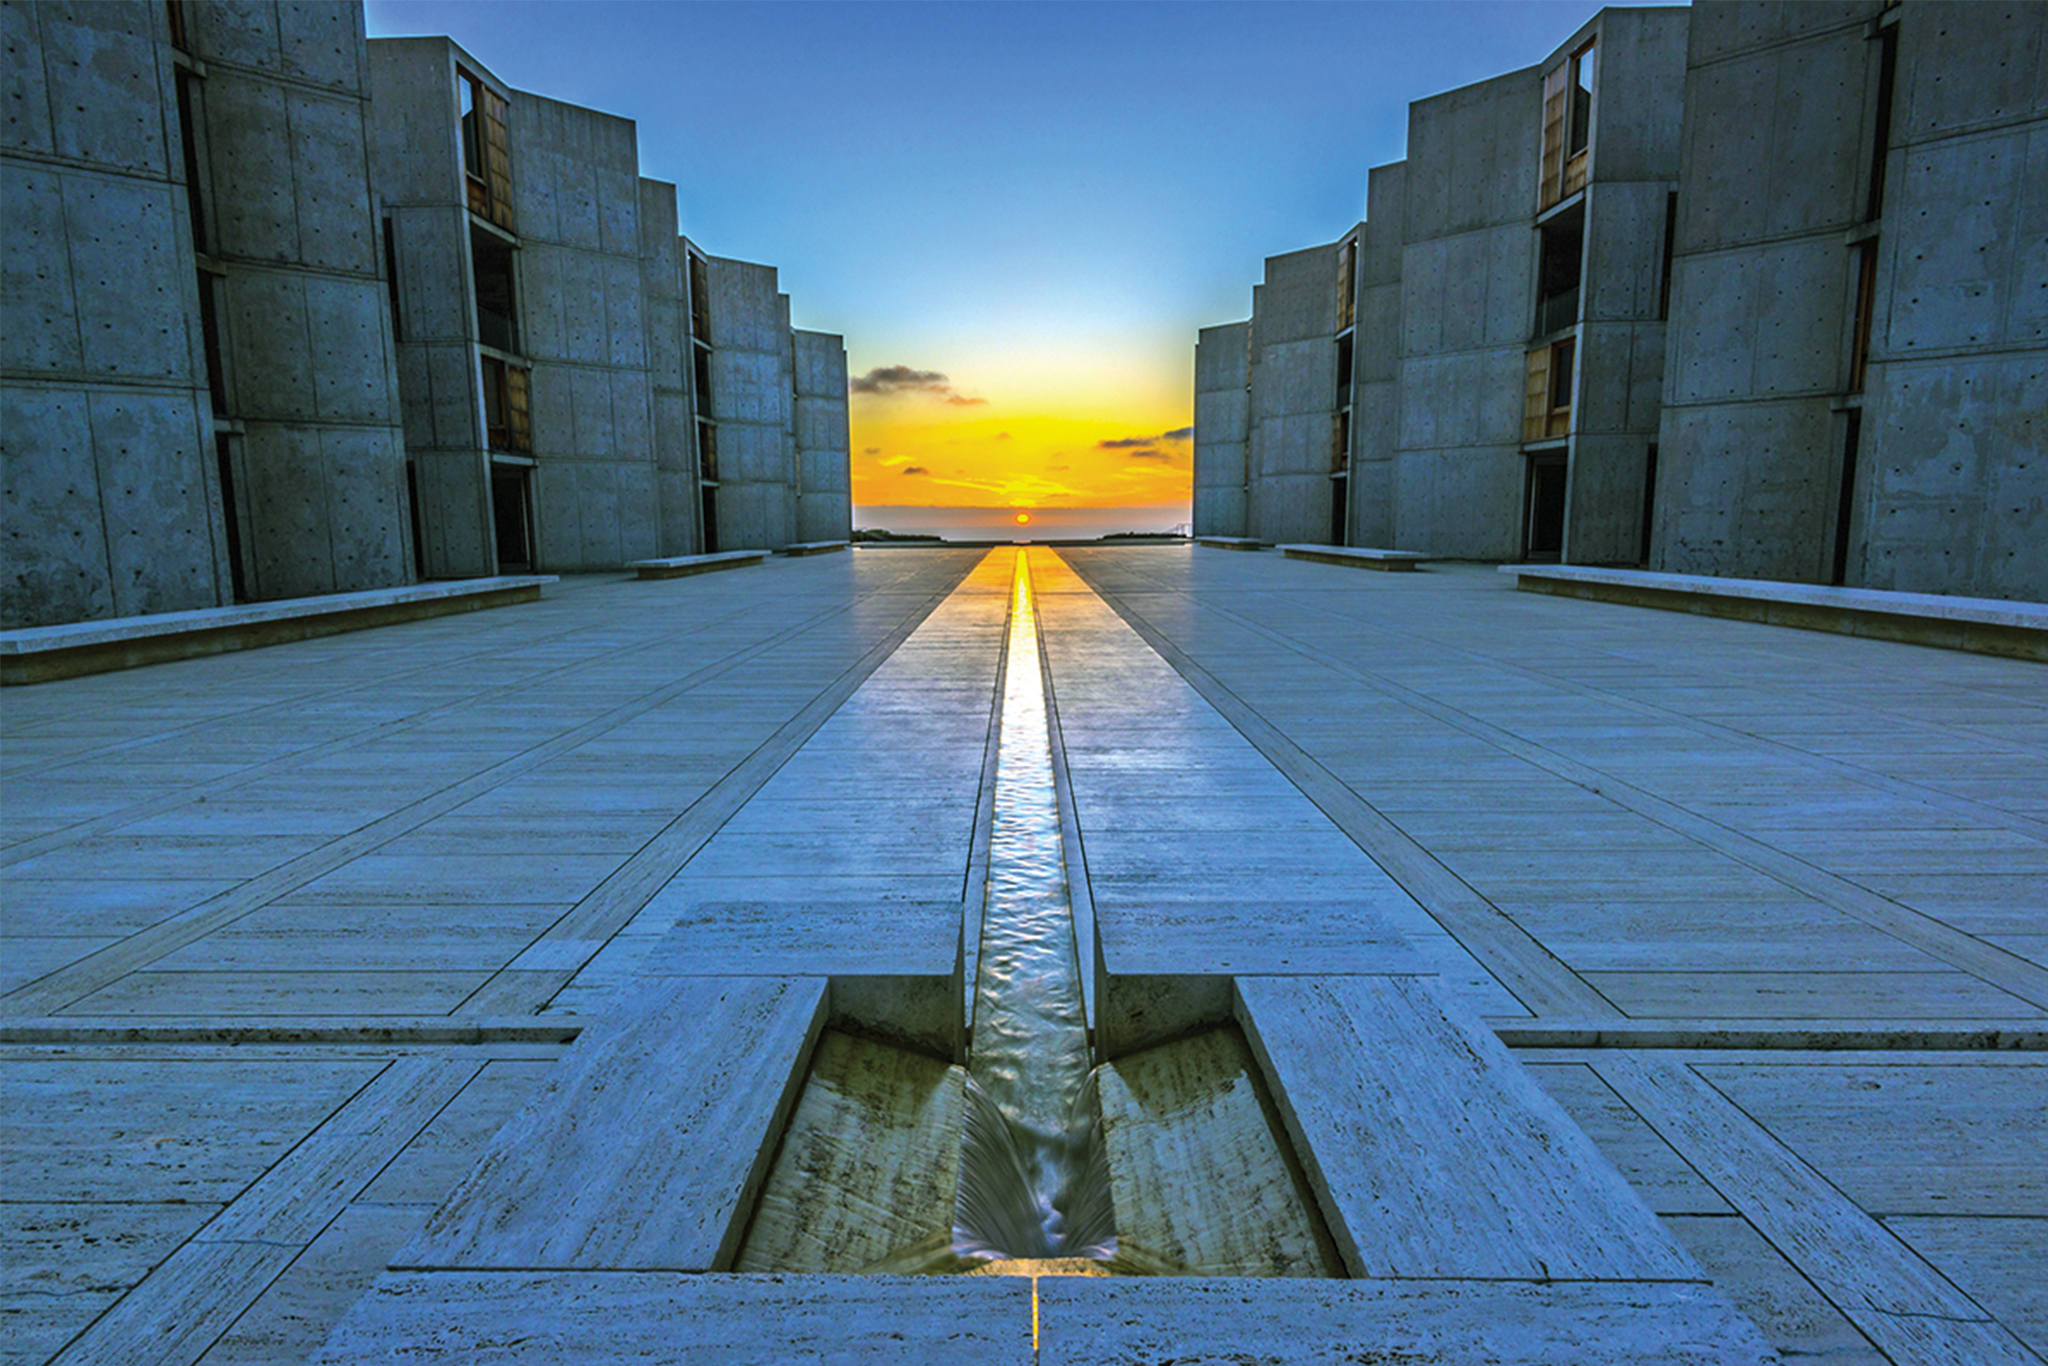 Adios to the open plaza at Salk Institute